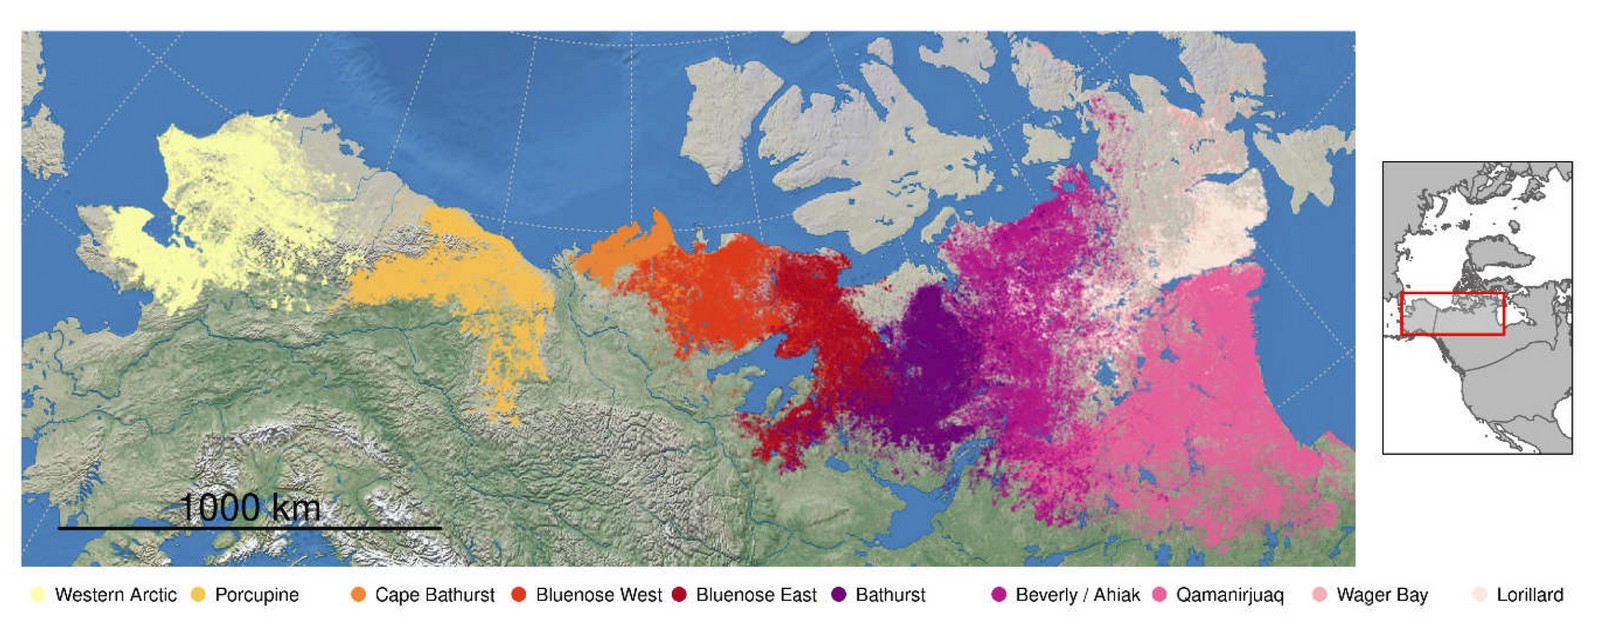 A map of northern Alaska and Canada with 10 colored areas showing the range of varibou caribou herds